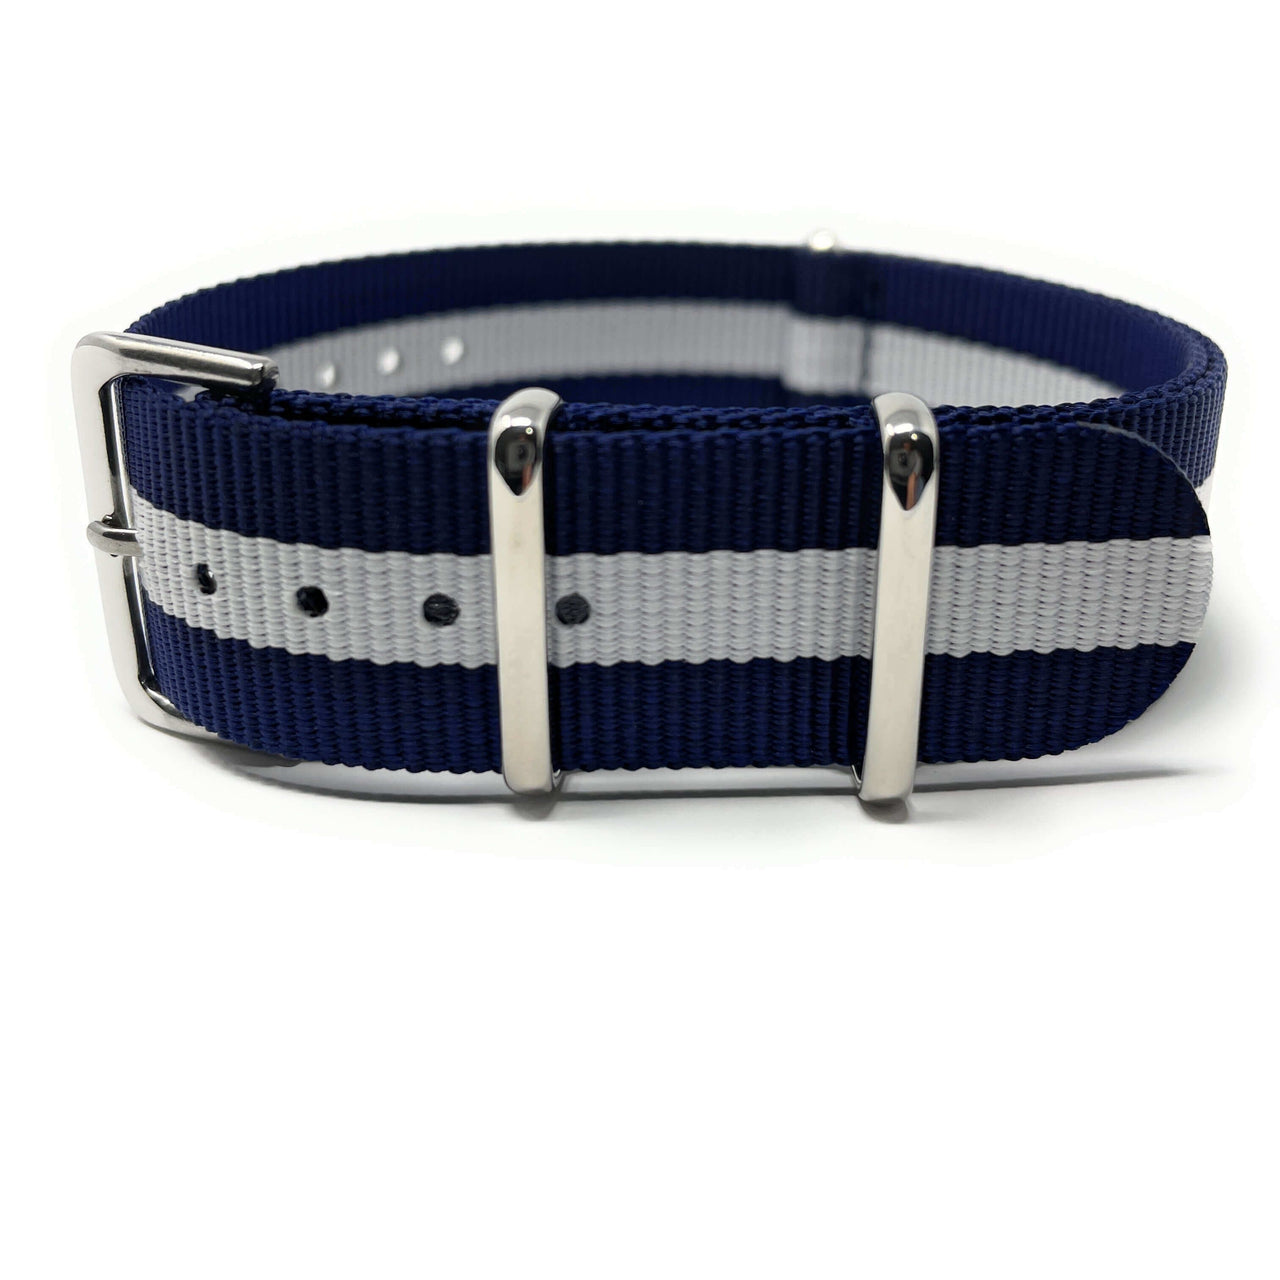 Classic Military Style Strap - Blue & White